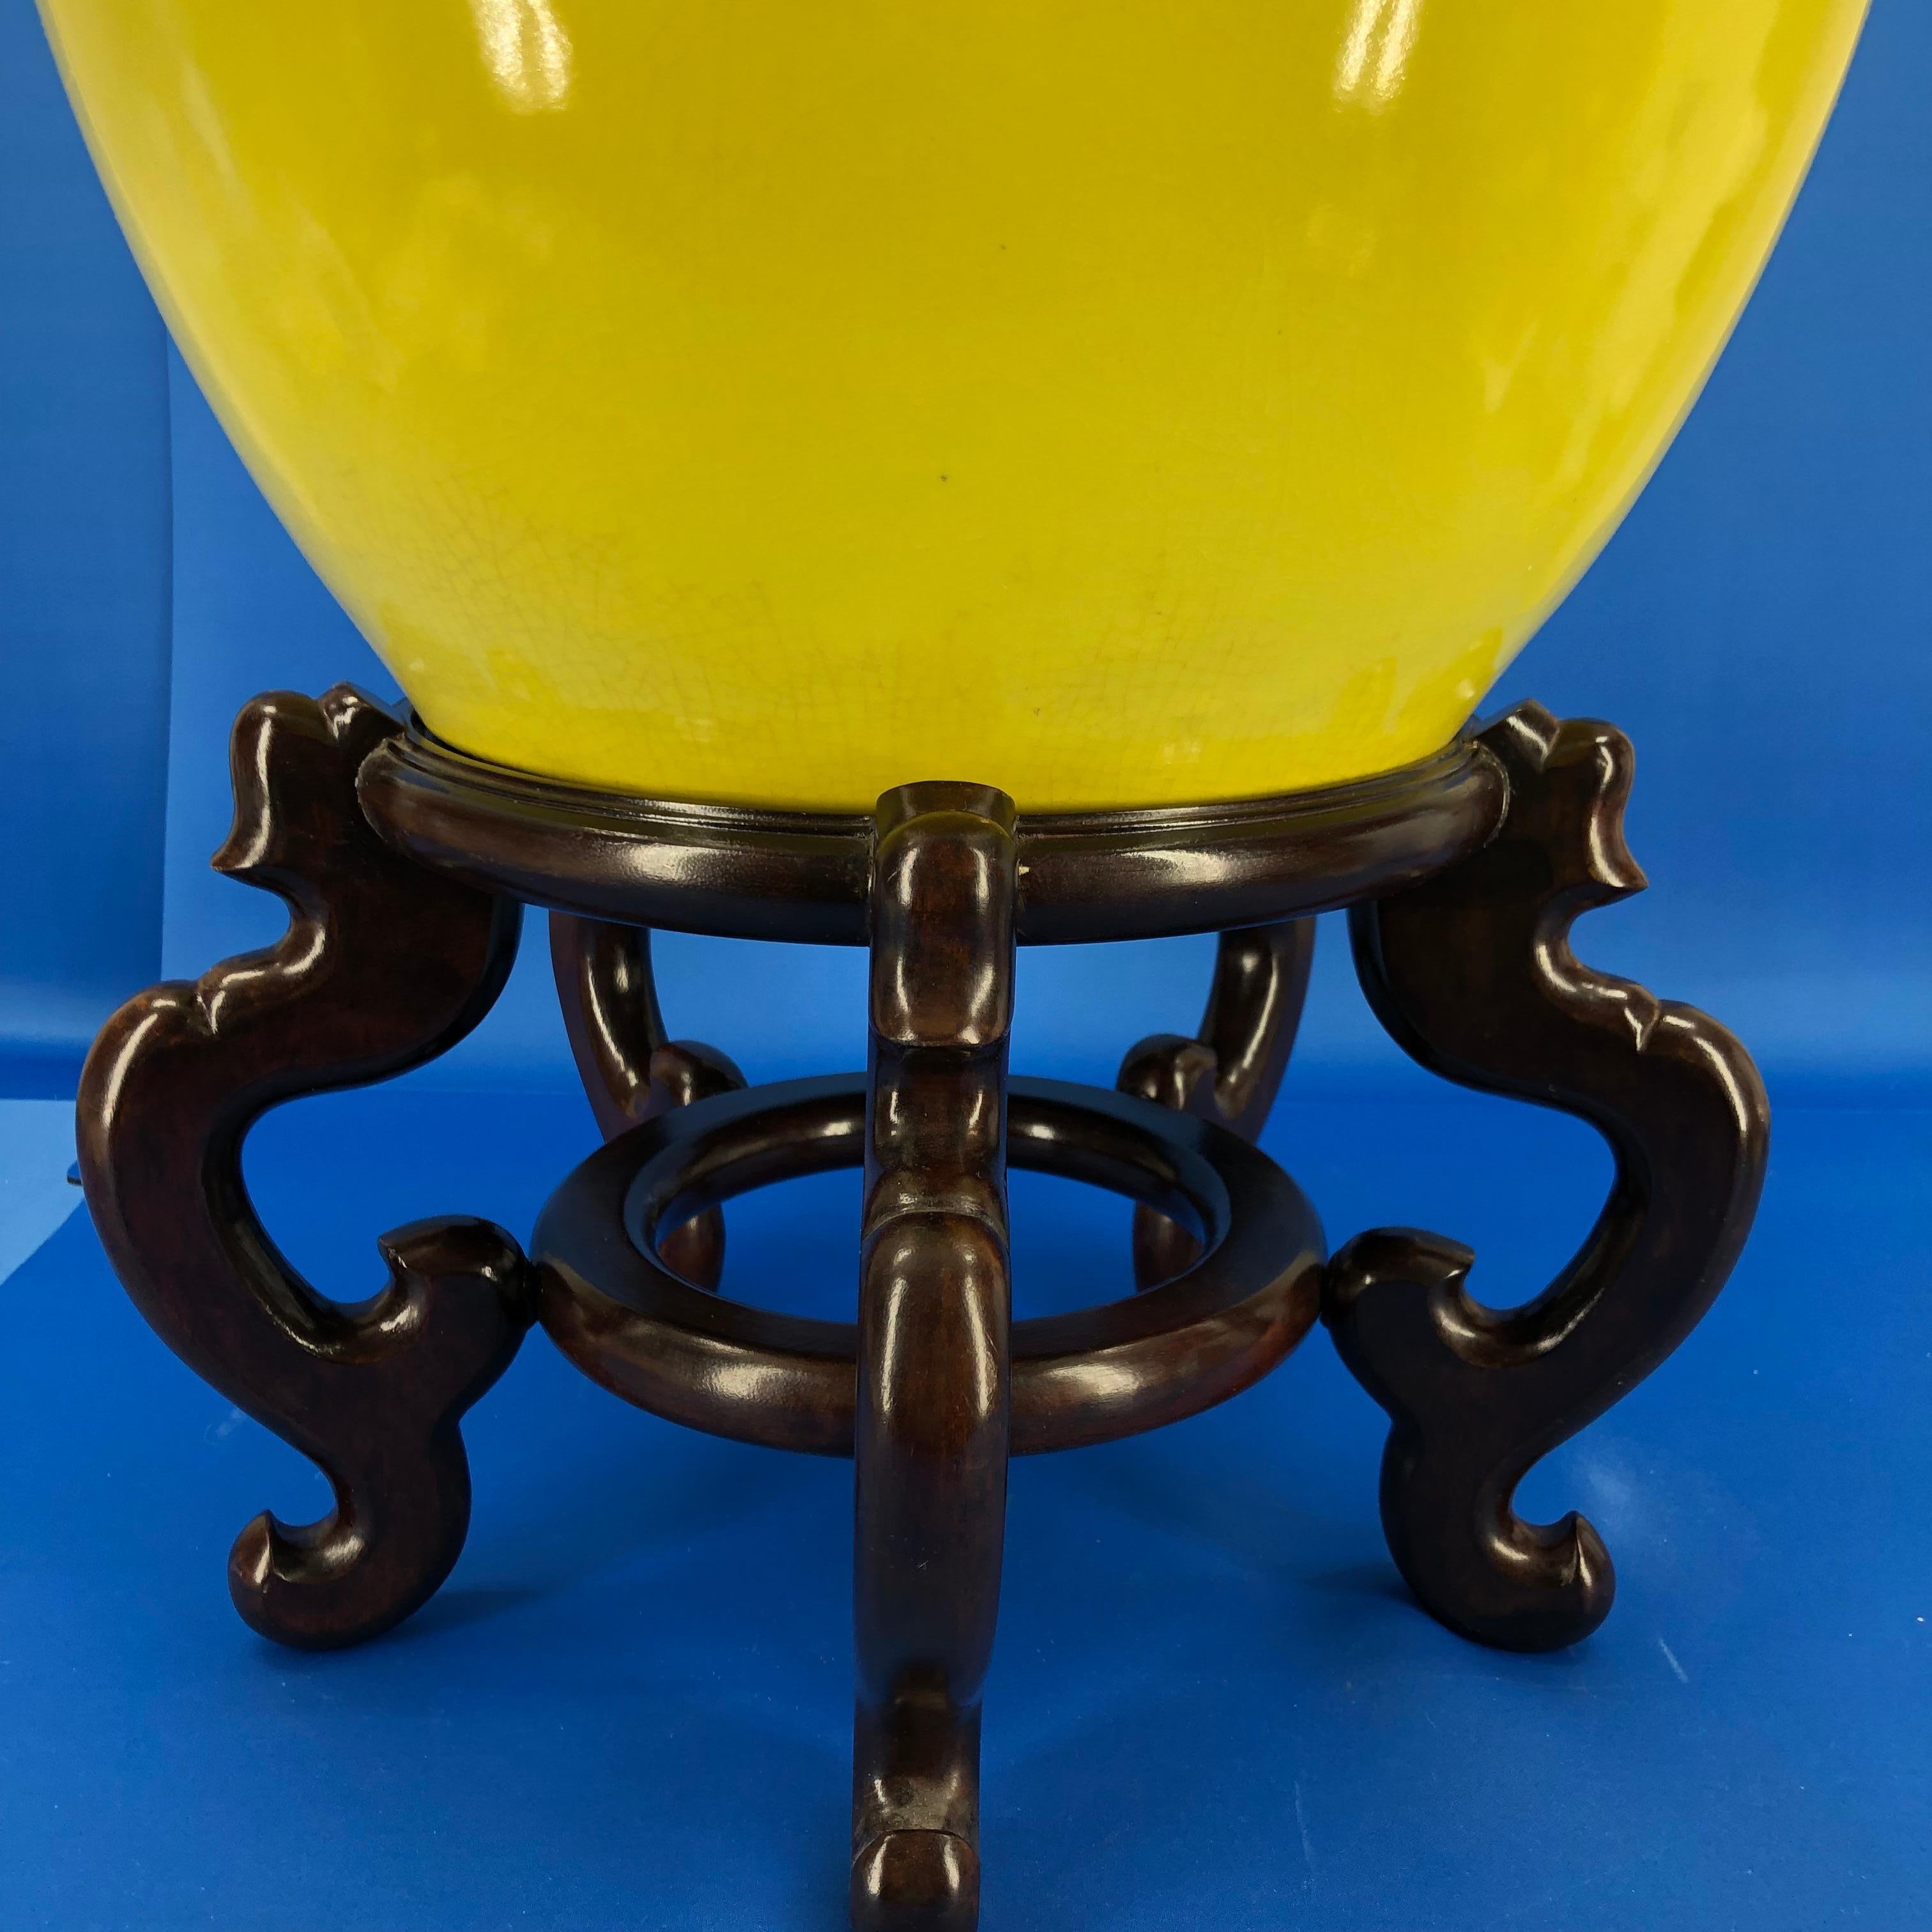 Large Bright Yellow Hand Painted Porcelain Jardinière Bowl on a Wooden Stand For Sale 6